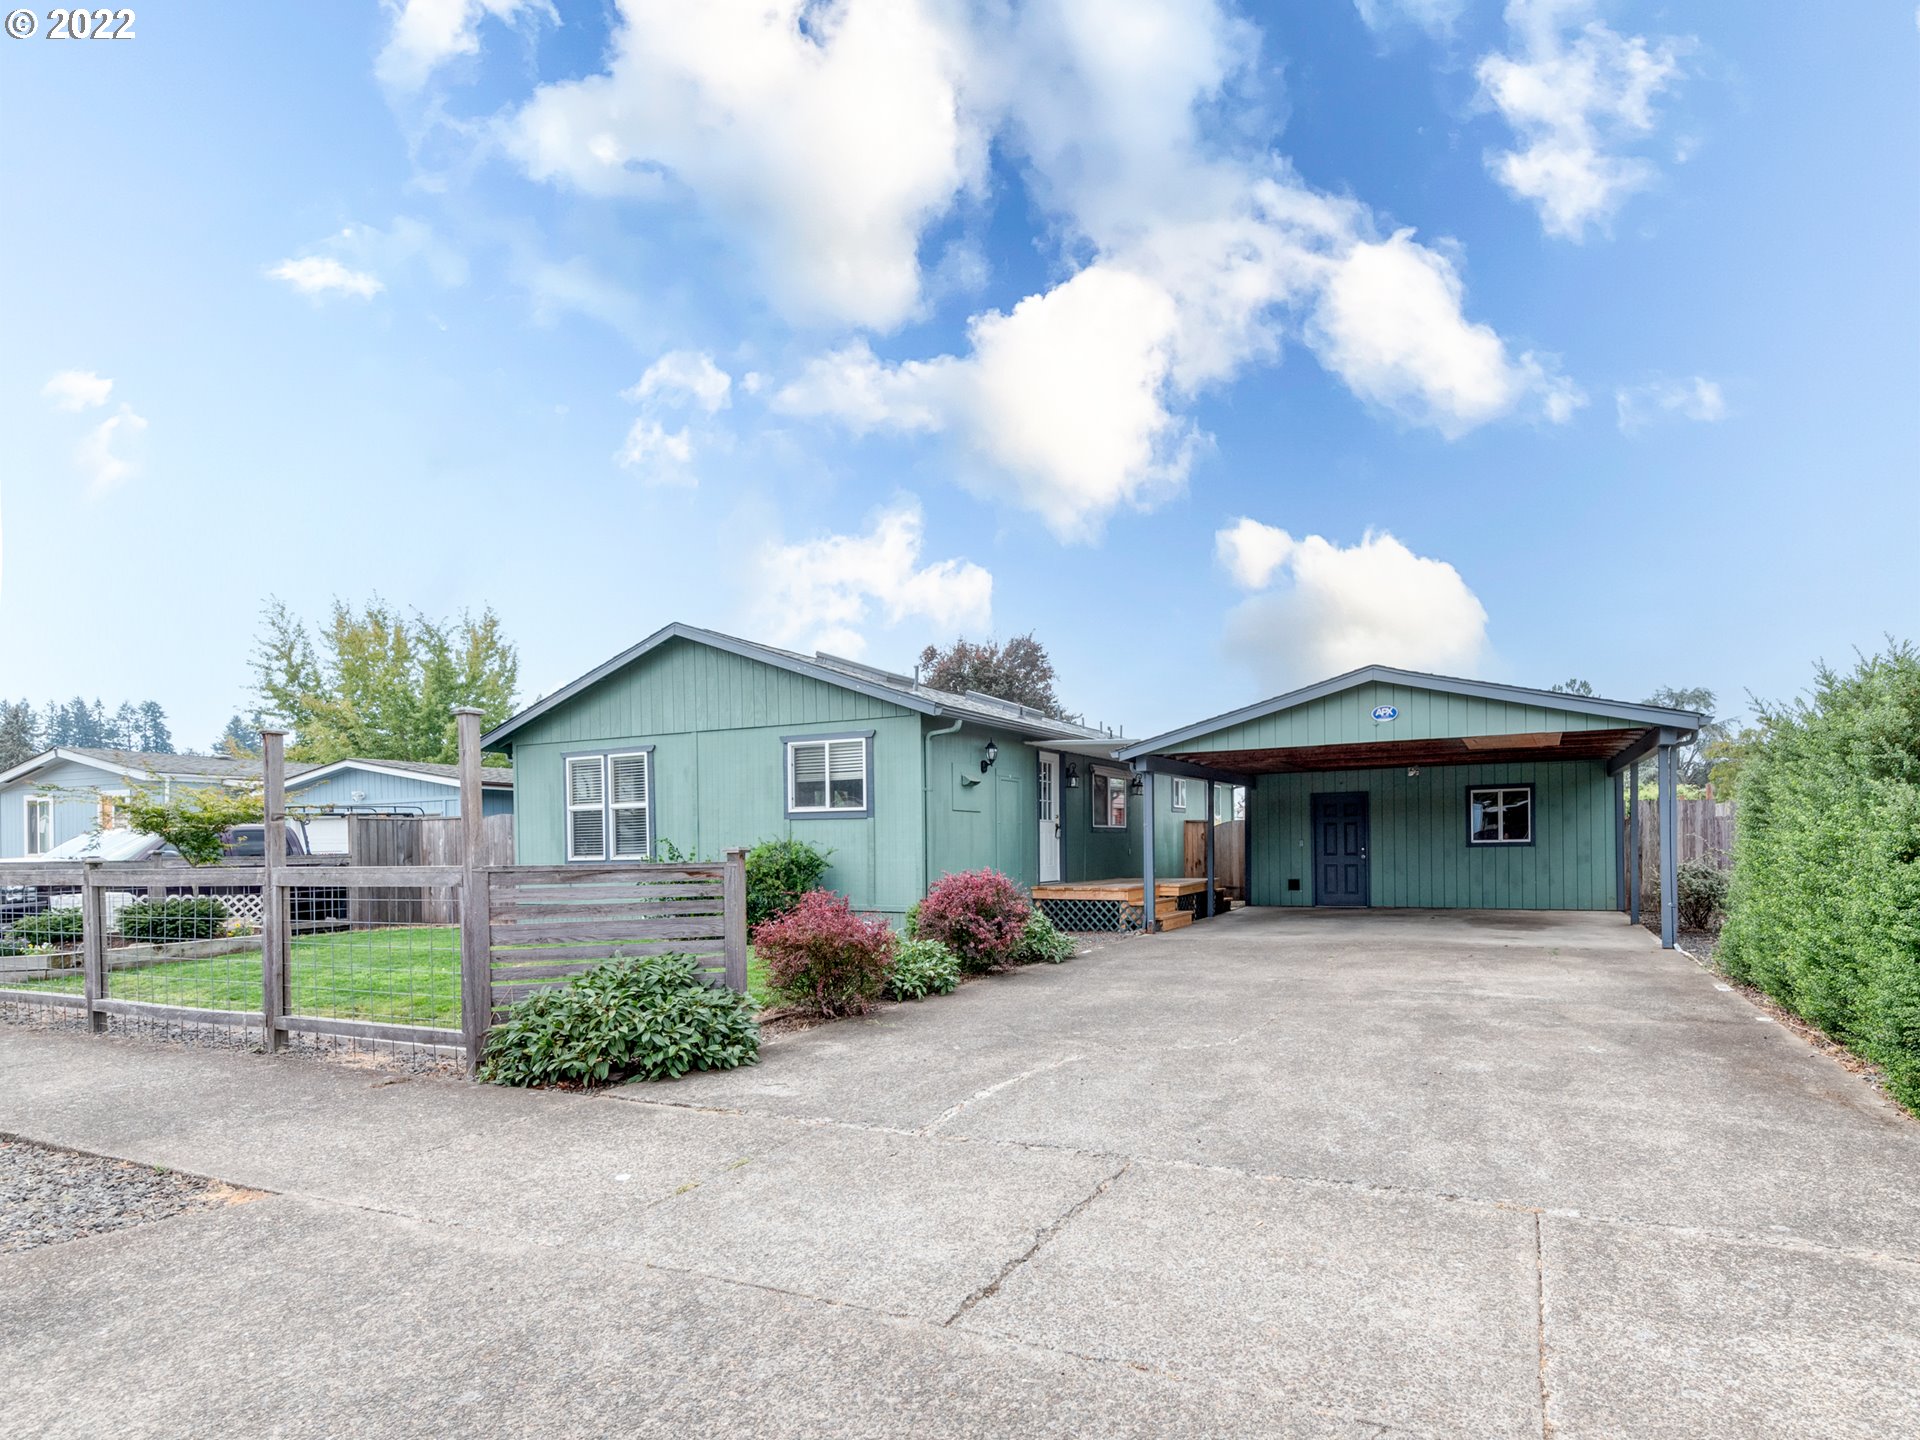 452 S 53RD ST, Springfield, OR 